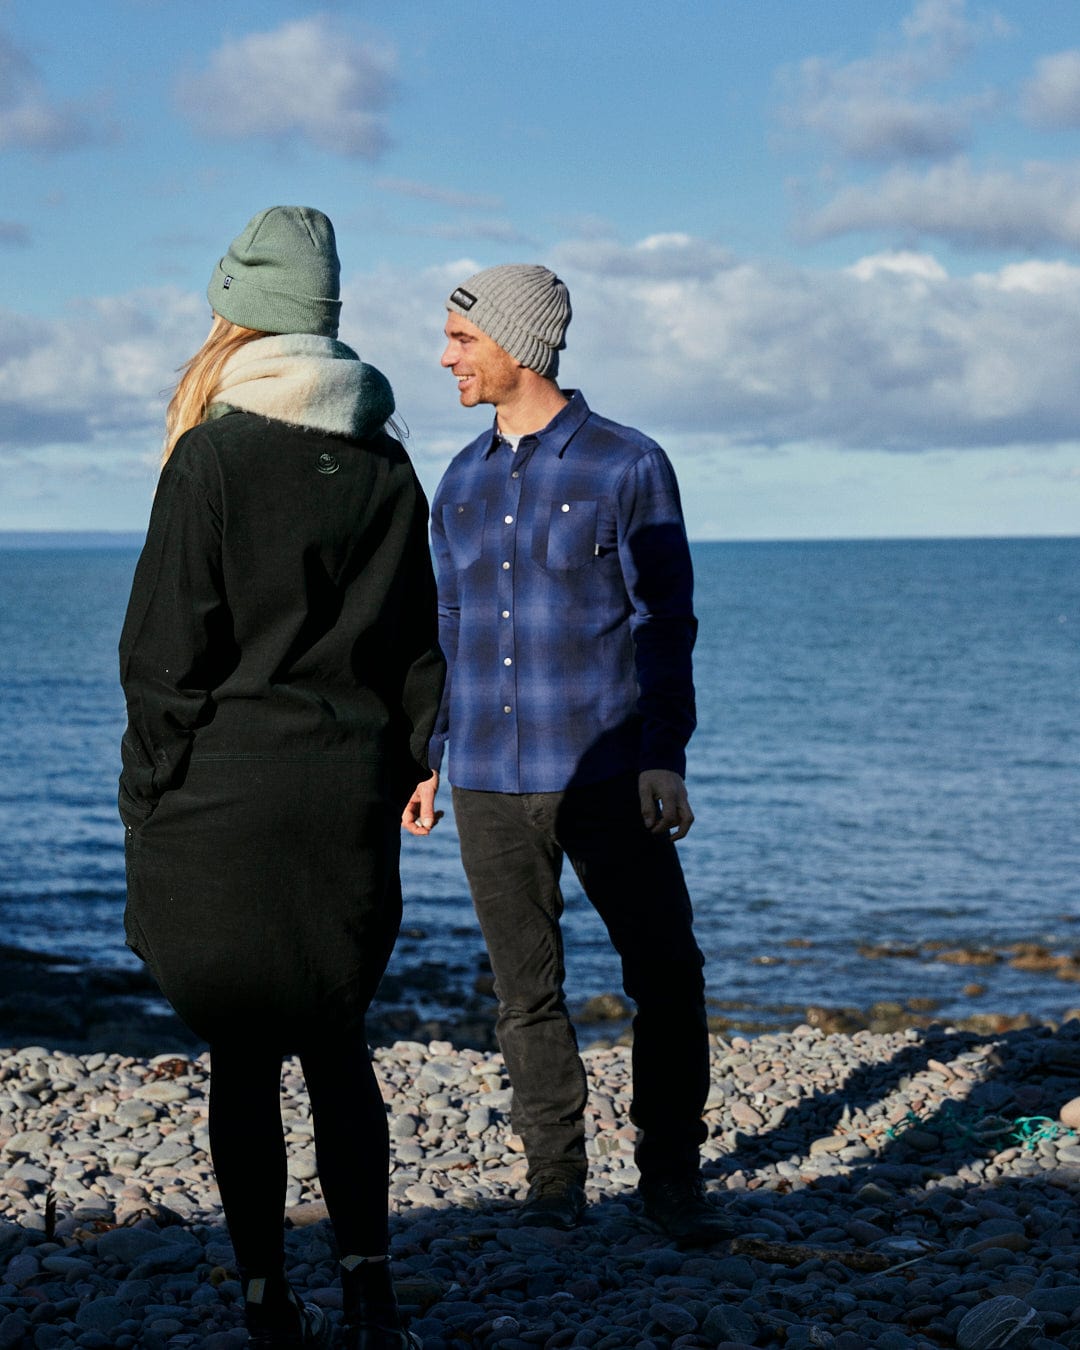 A man and woman standing on a rocky beach looking at the ocean, wearing Farris - Mens Check Shirts in Blue, branded by Saltrock.